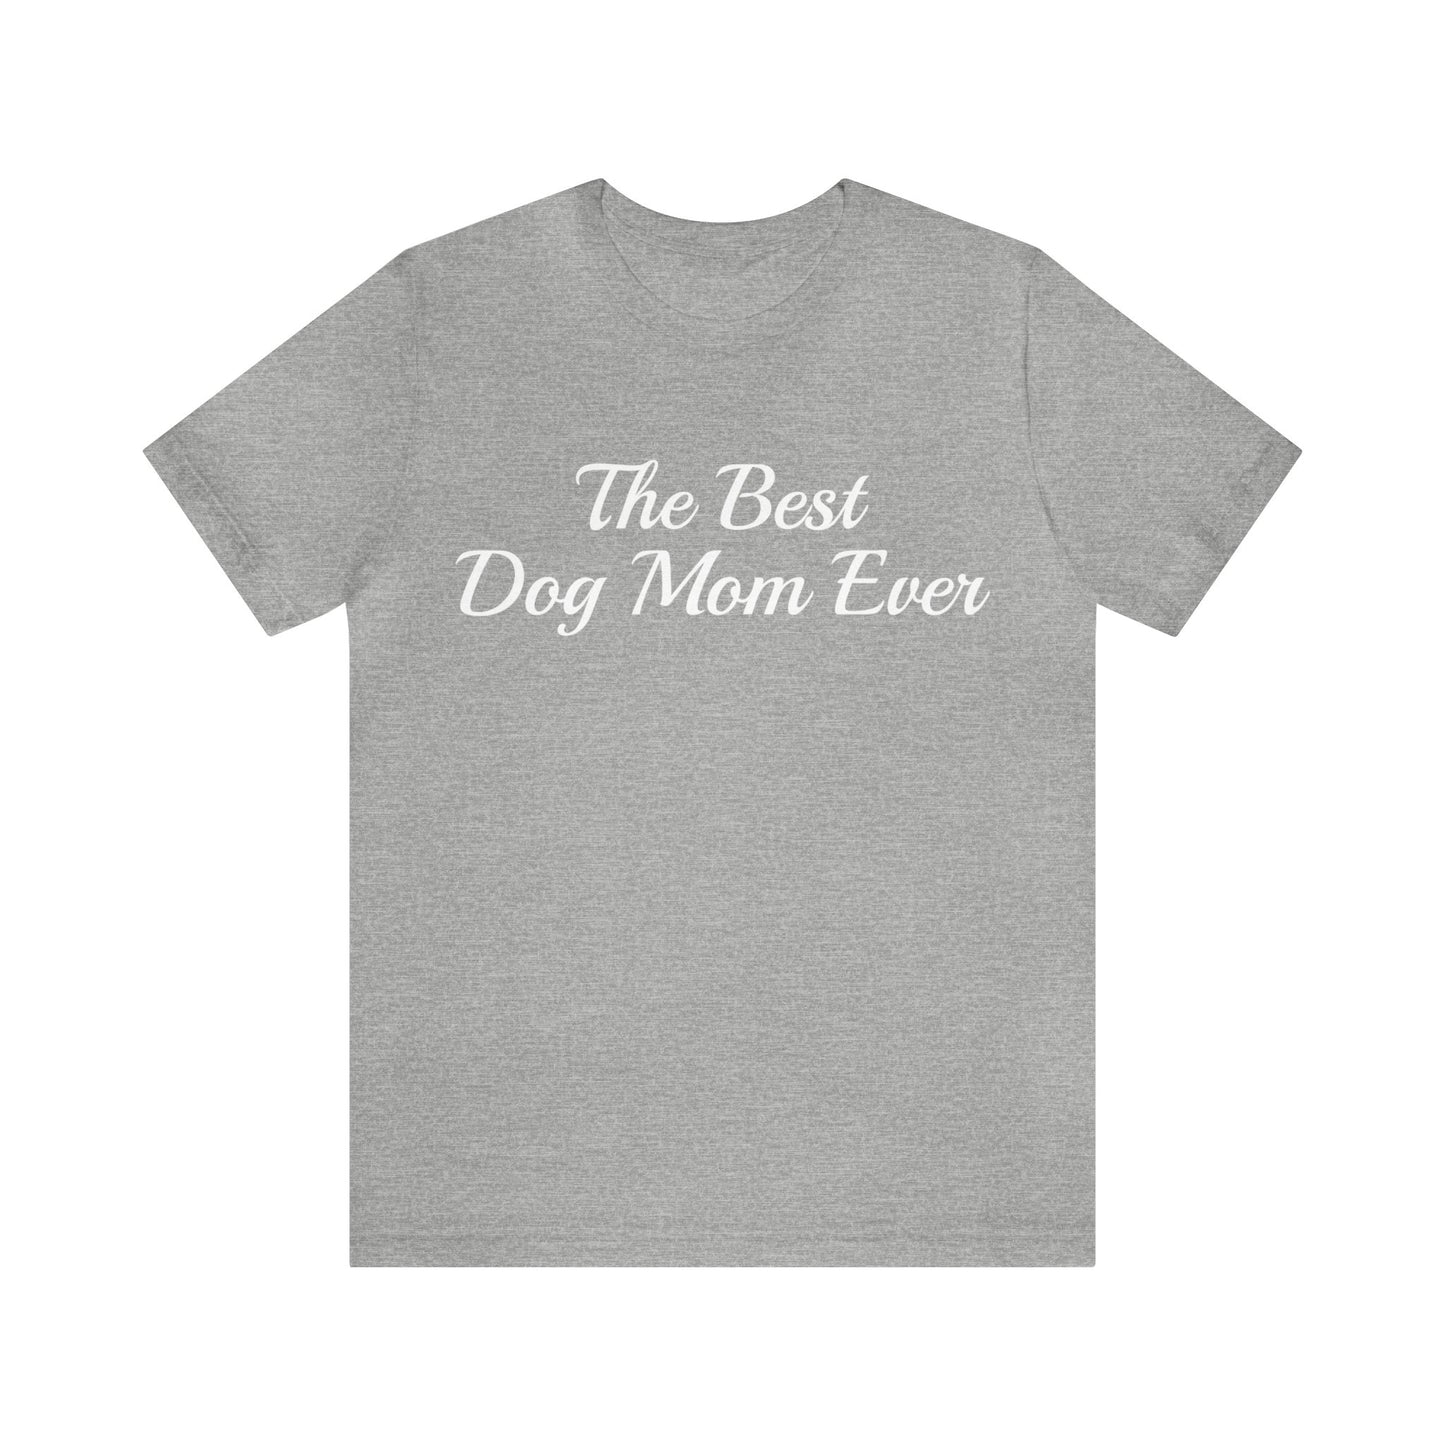 Athletic Heather T-Shirt Tshirt Design Gift for Friend and Family Short Sleeved Shirt for Dog Lovers Petrova Designs